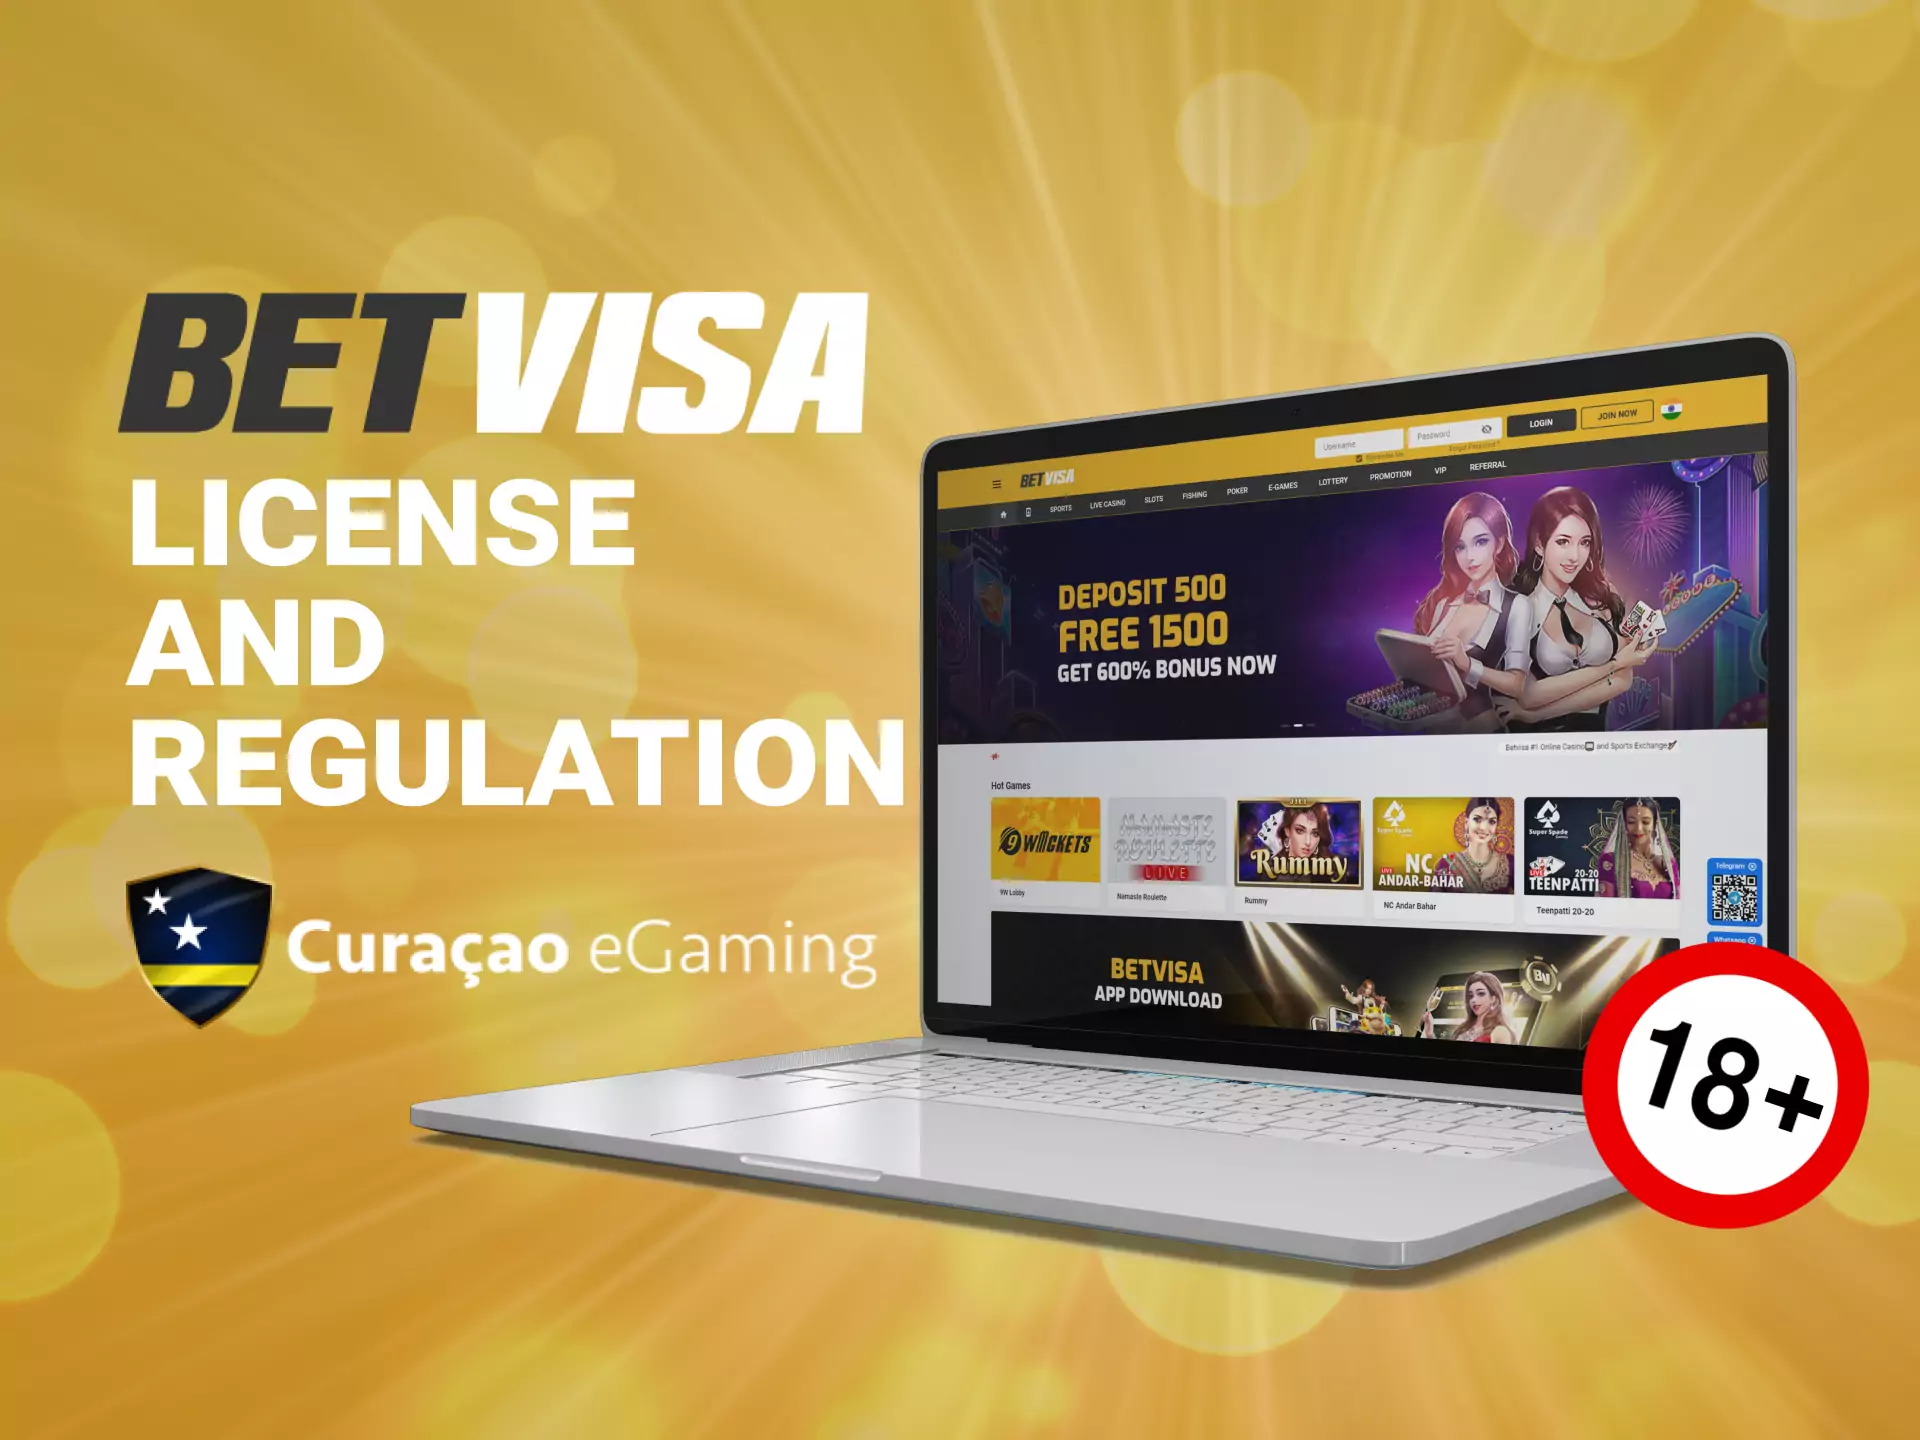 Betvisa works legally and is verified by Curacao eGaming.